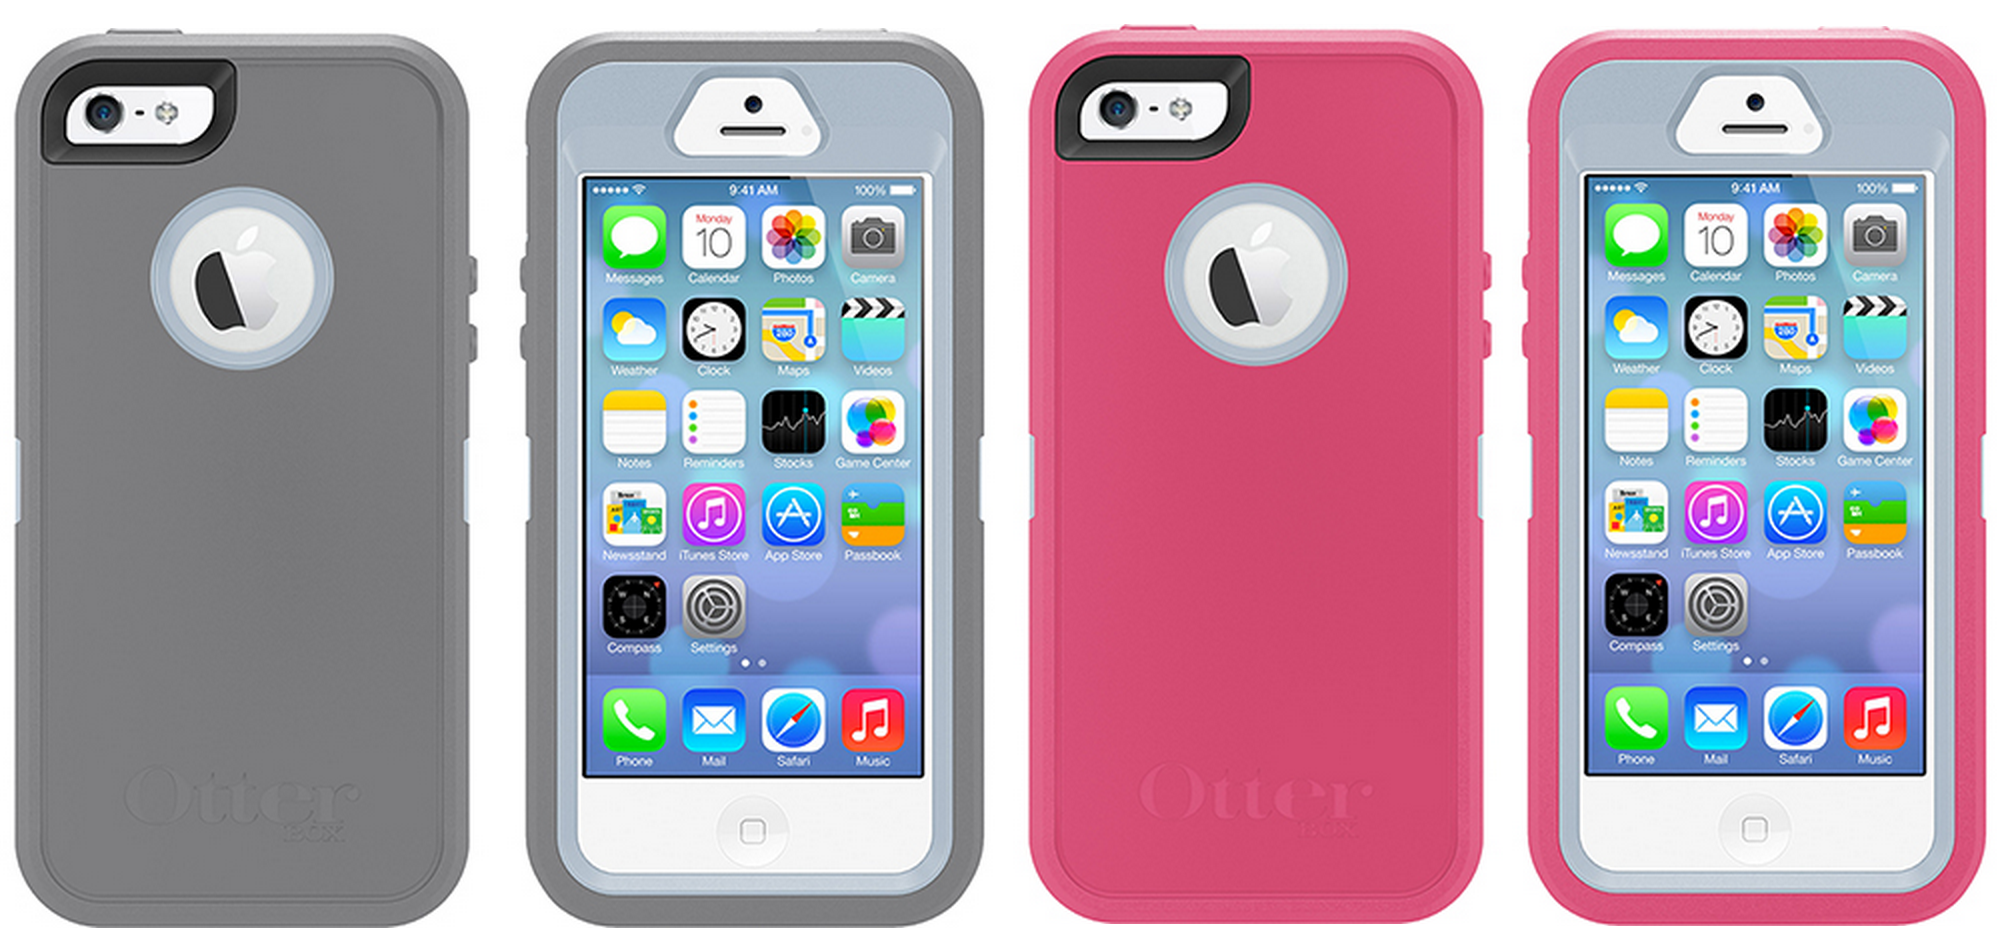 Otterbox-iPhone-5s-case